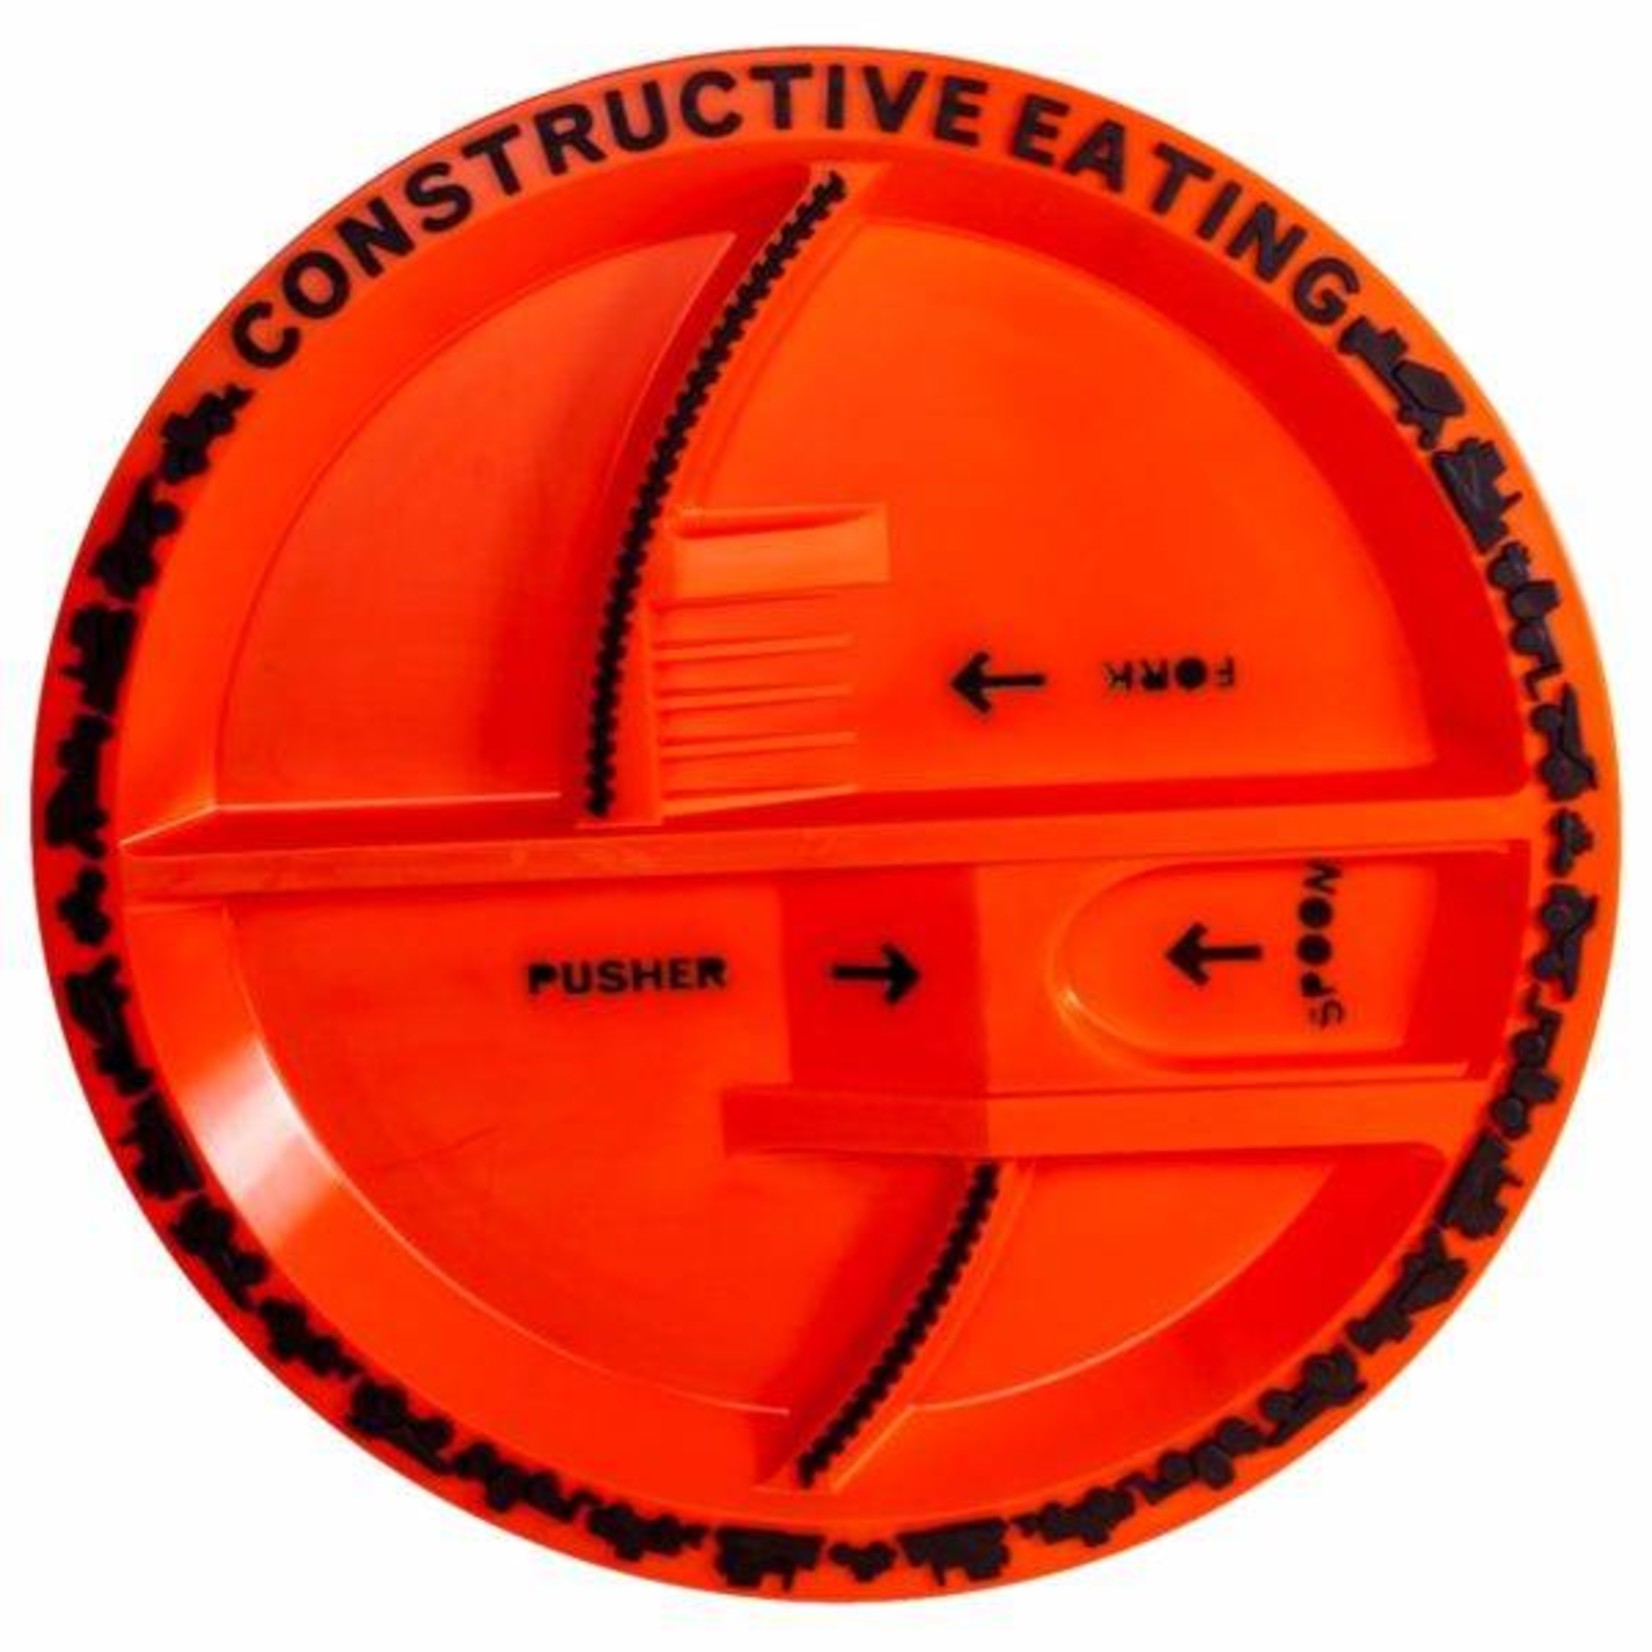 Constructive Eating Plate, Construction